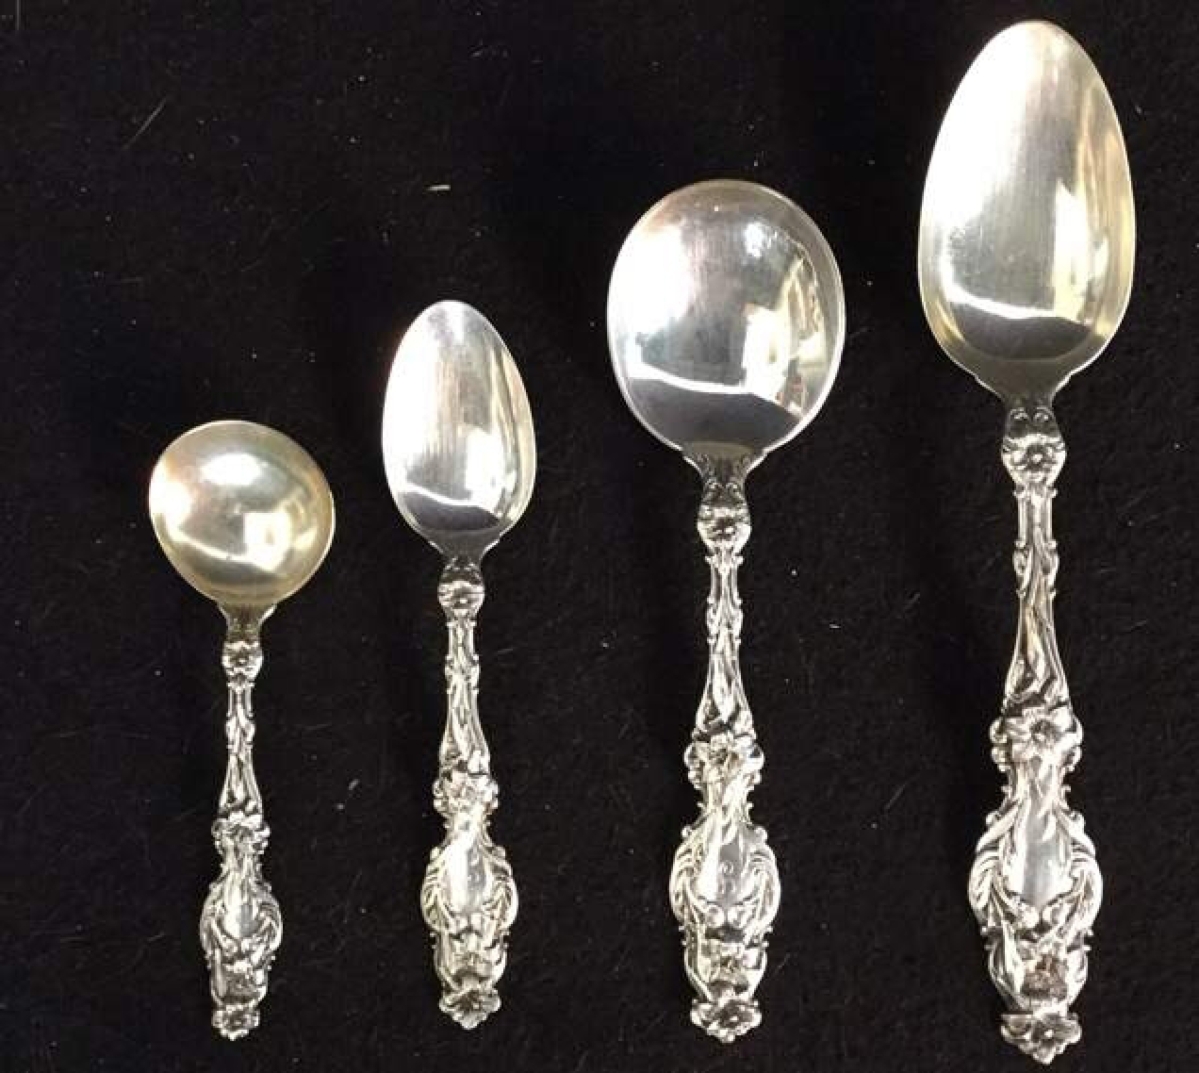 Some pieces from the sale’s top lot, a 127-piece Whiting Lily sterling flatware set from a Parisian estate, which sold for $6,350.